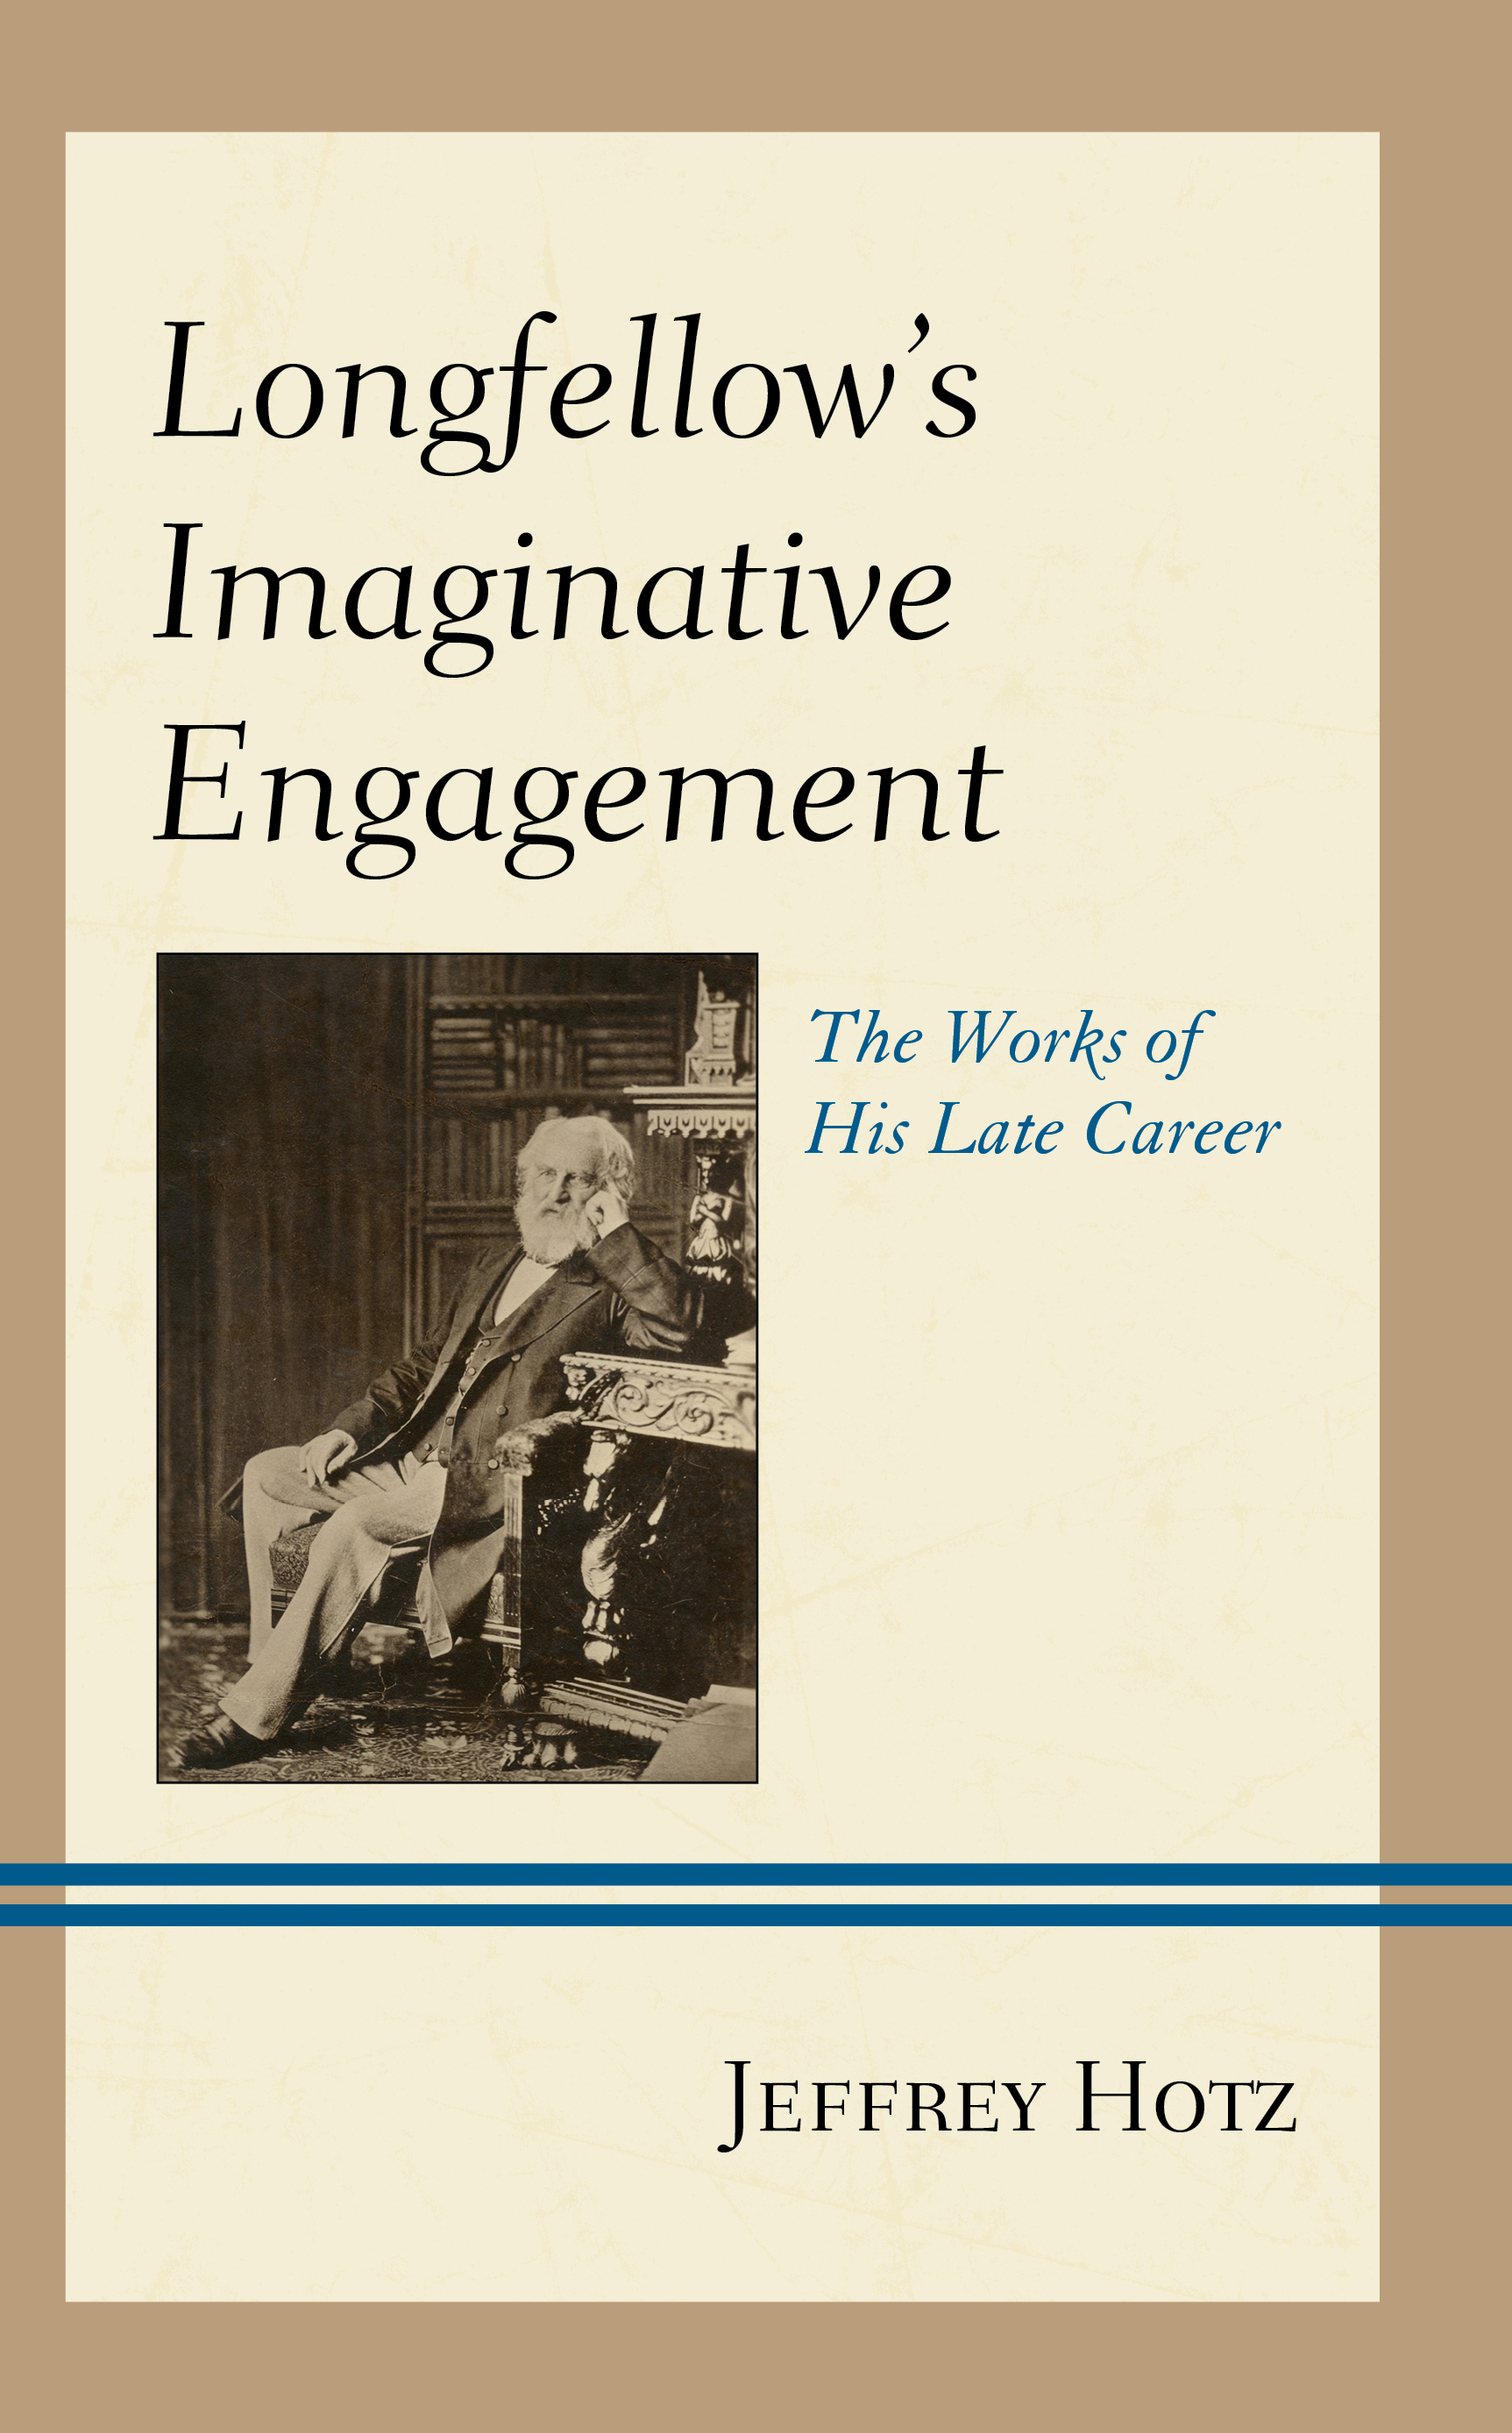 Longfellow's Imaginative Engagement: The Works of His Late Career